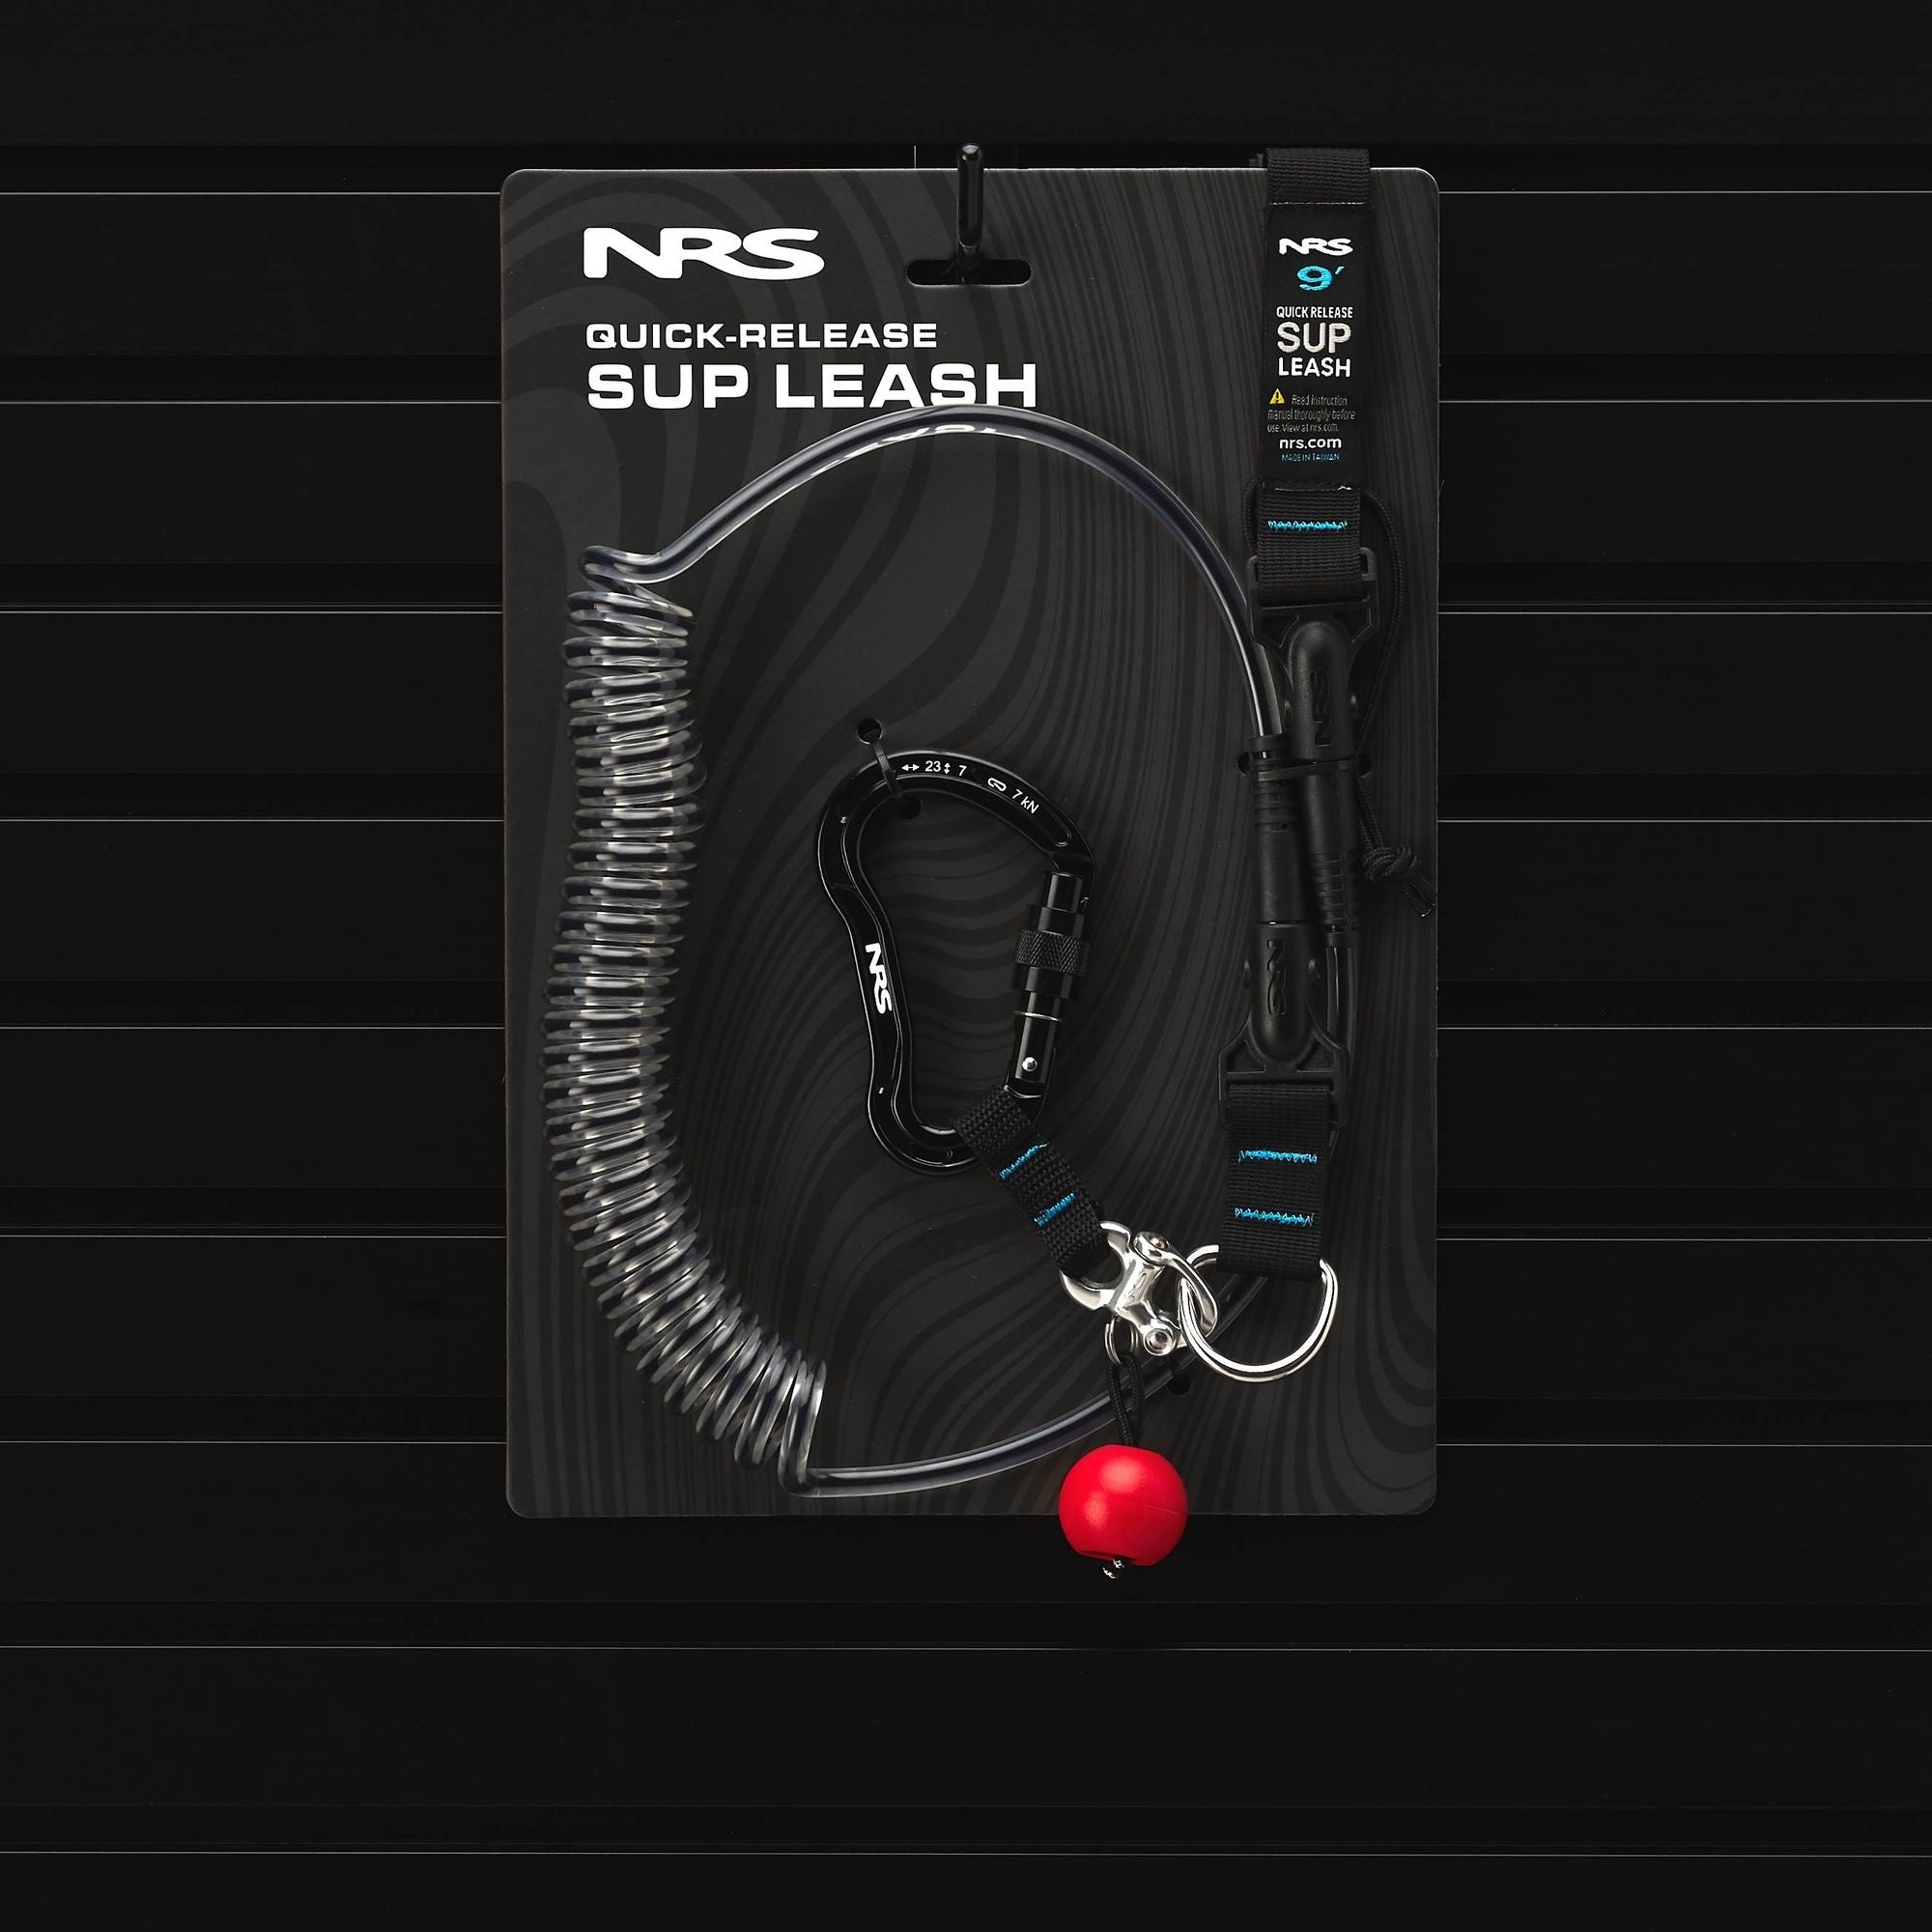 NRS - Quick Release SUP Leash